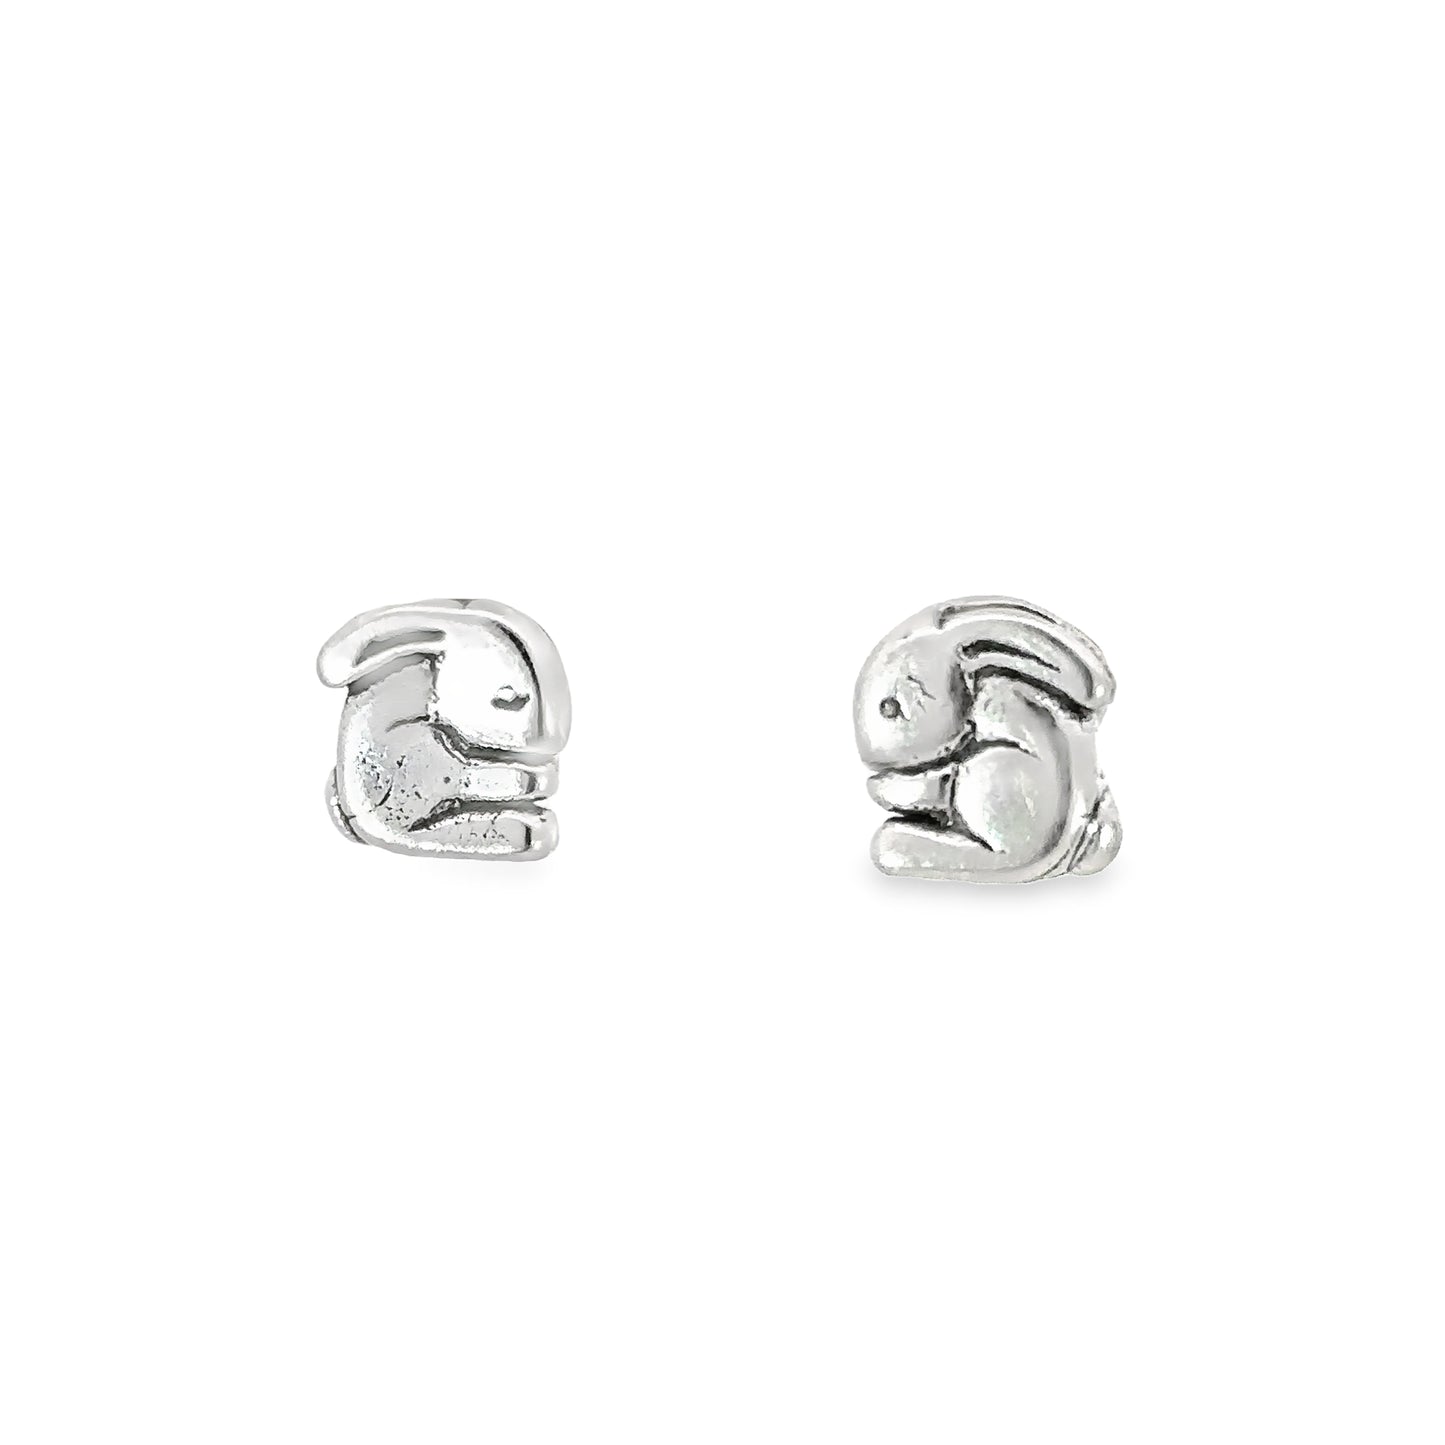 These Bunny Studs are perfect for wildlife lovers.